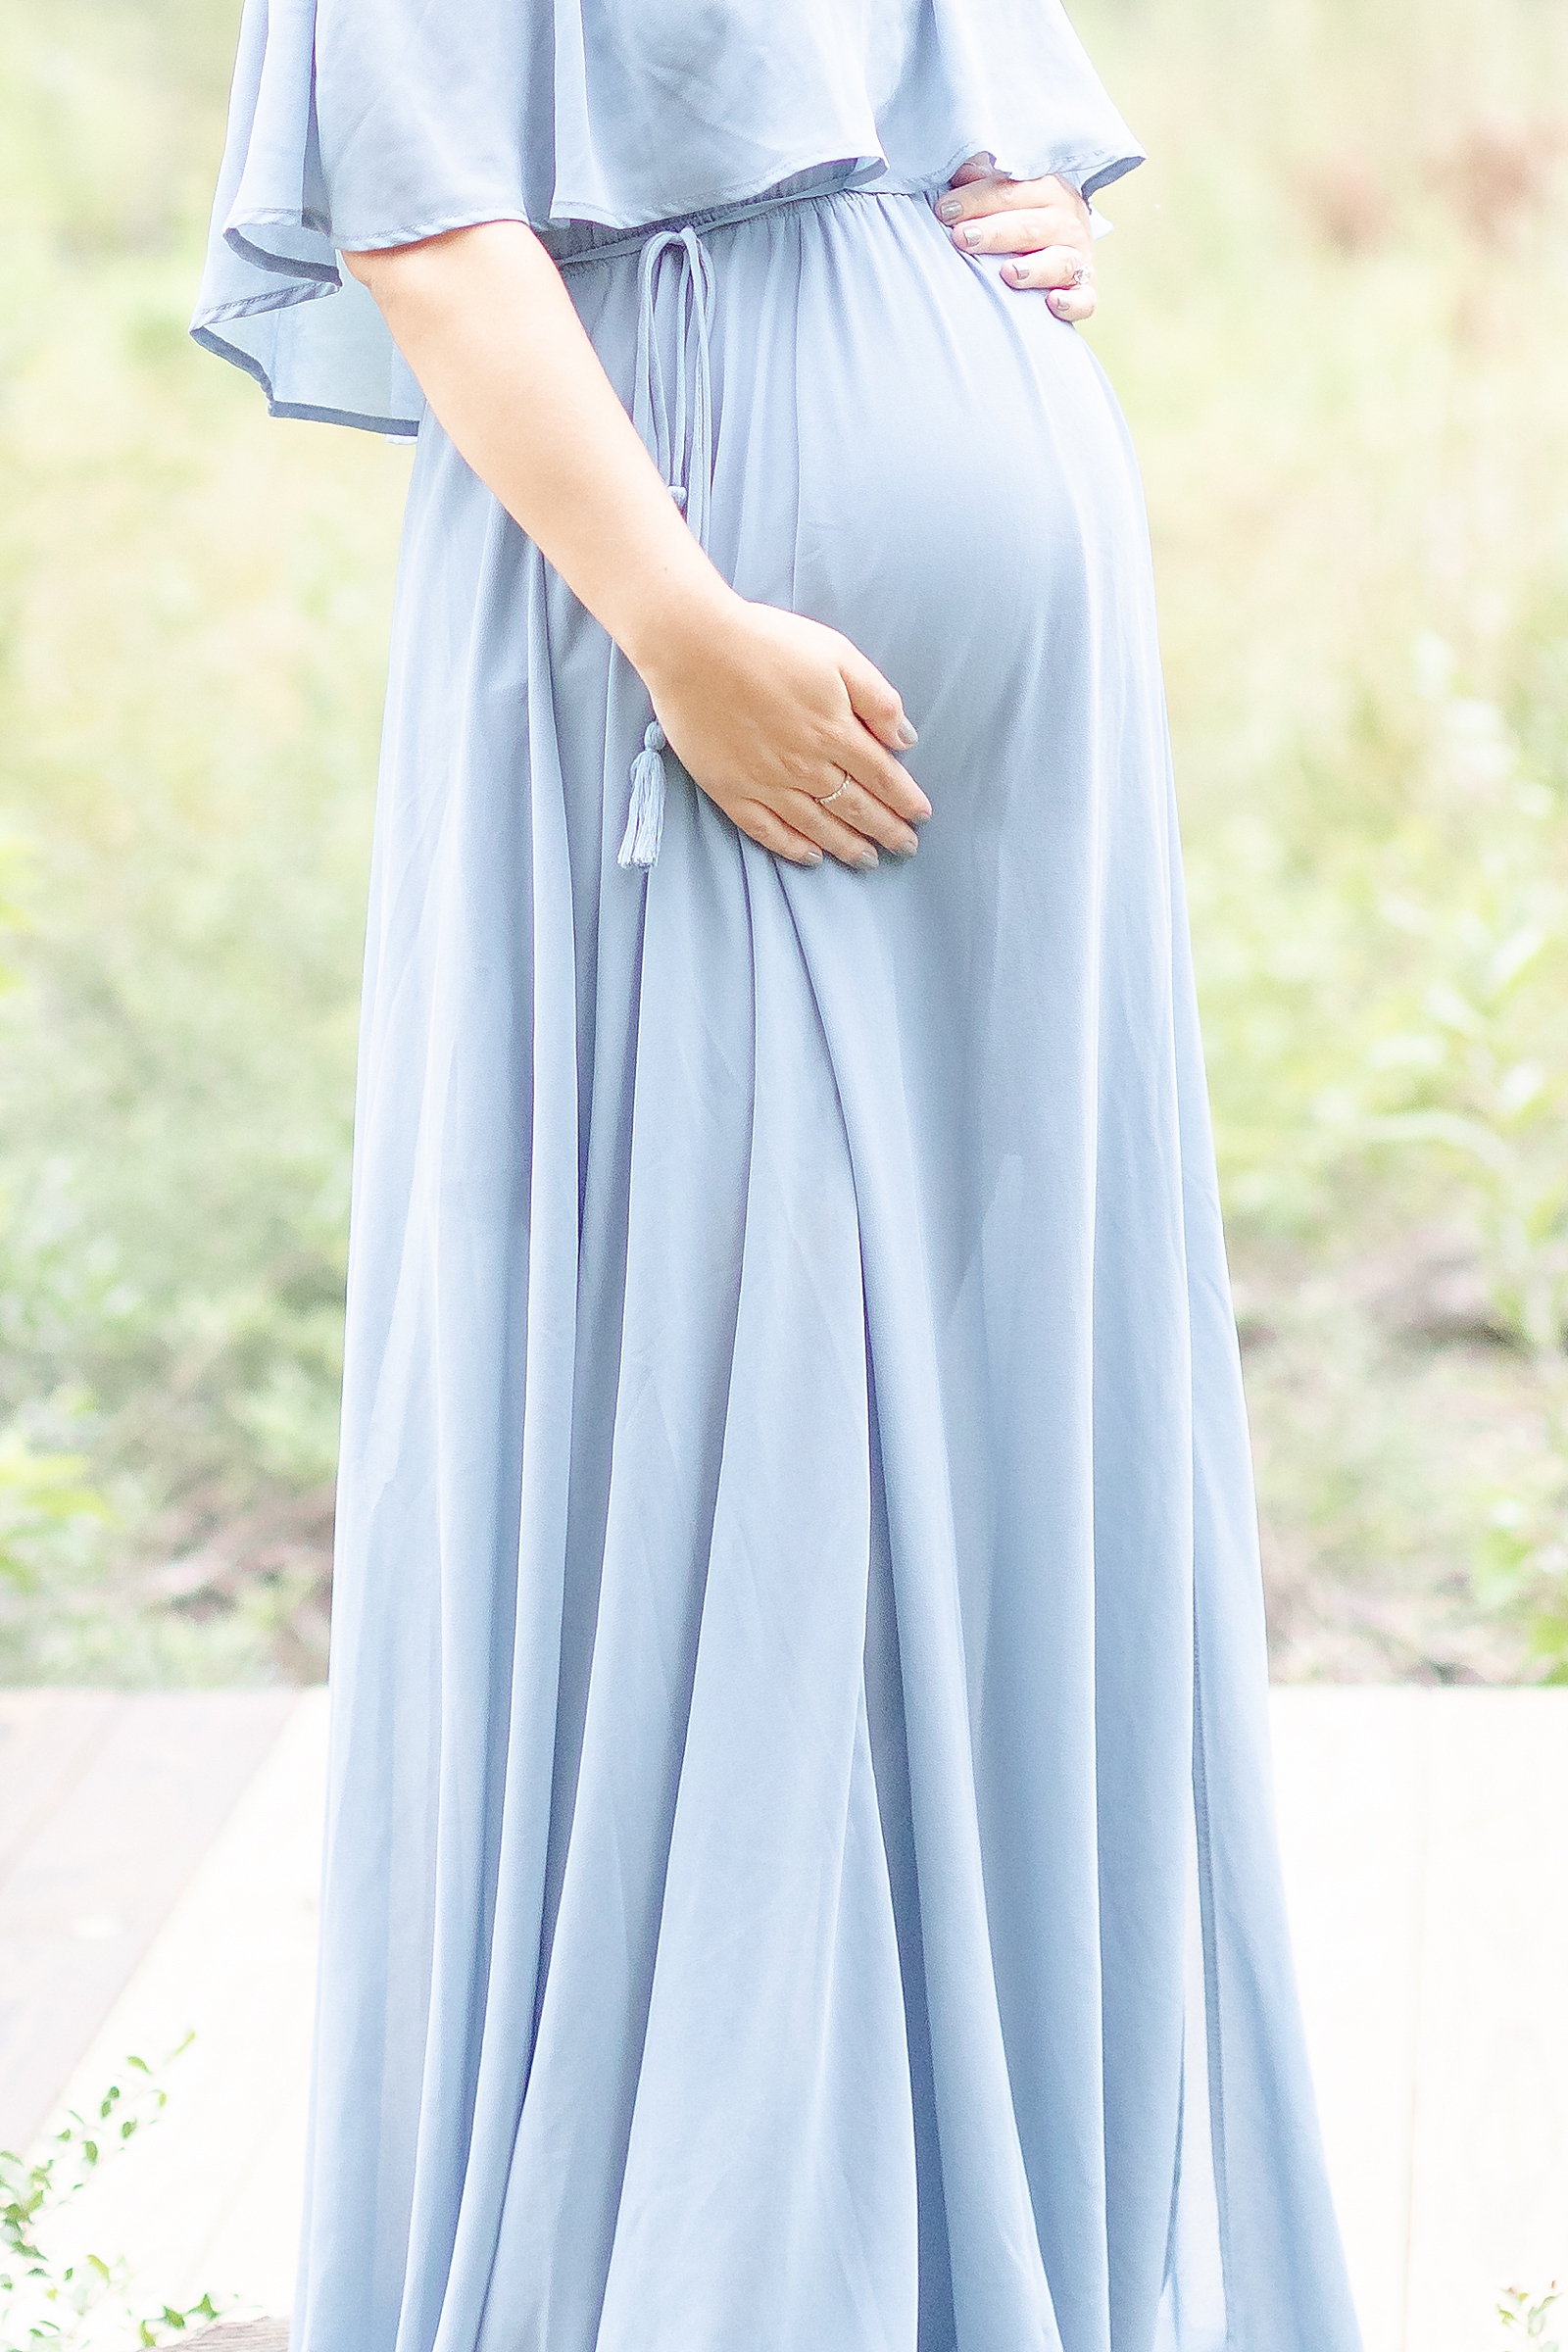 detail shot of baby bump with mom wearing blue gown during rainbow baby maternity session in Houston